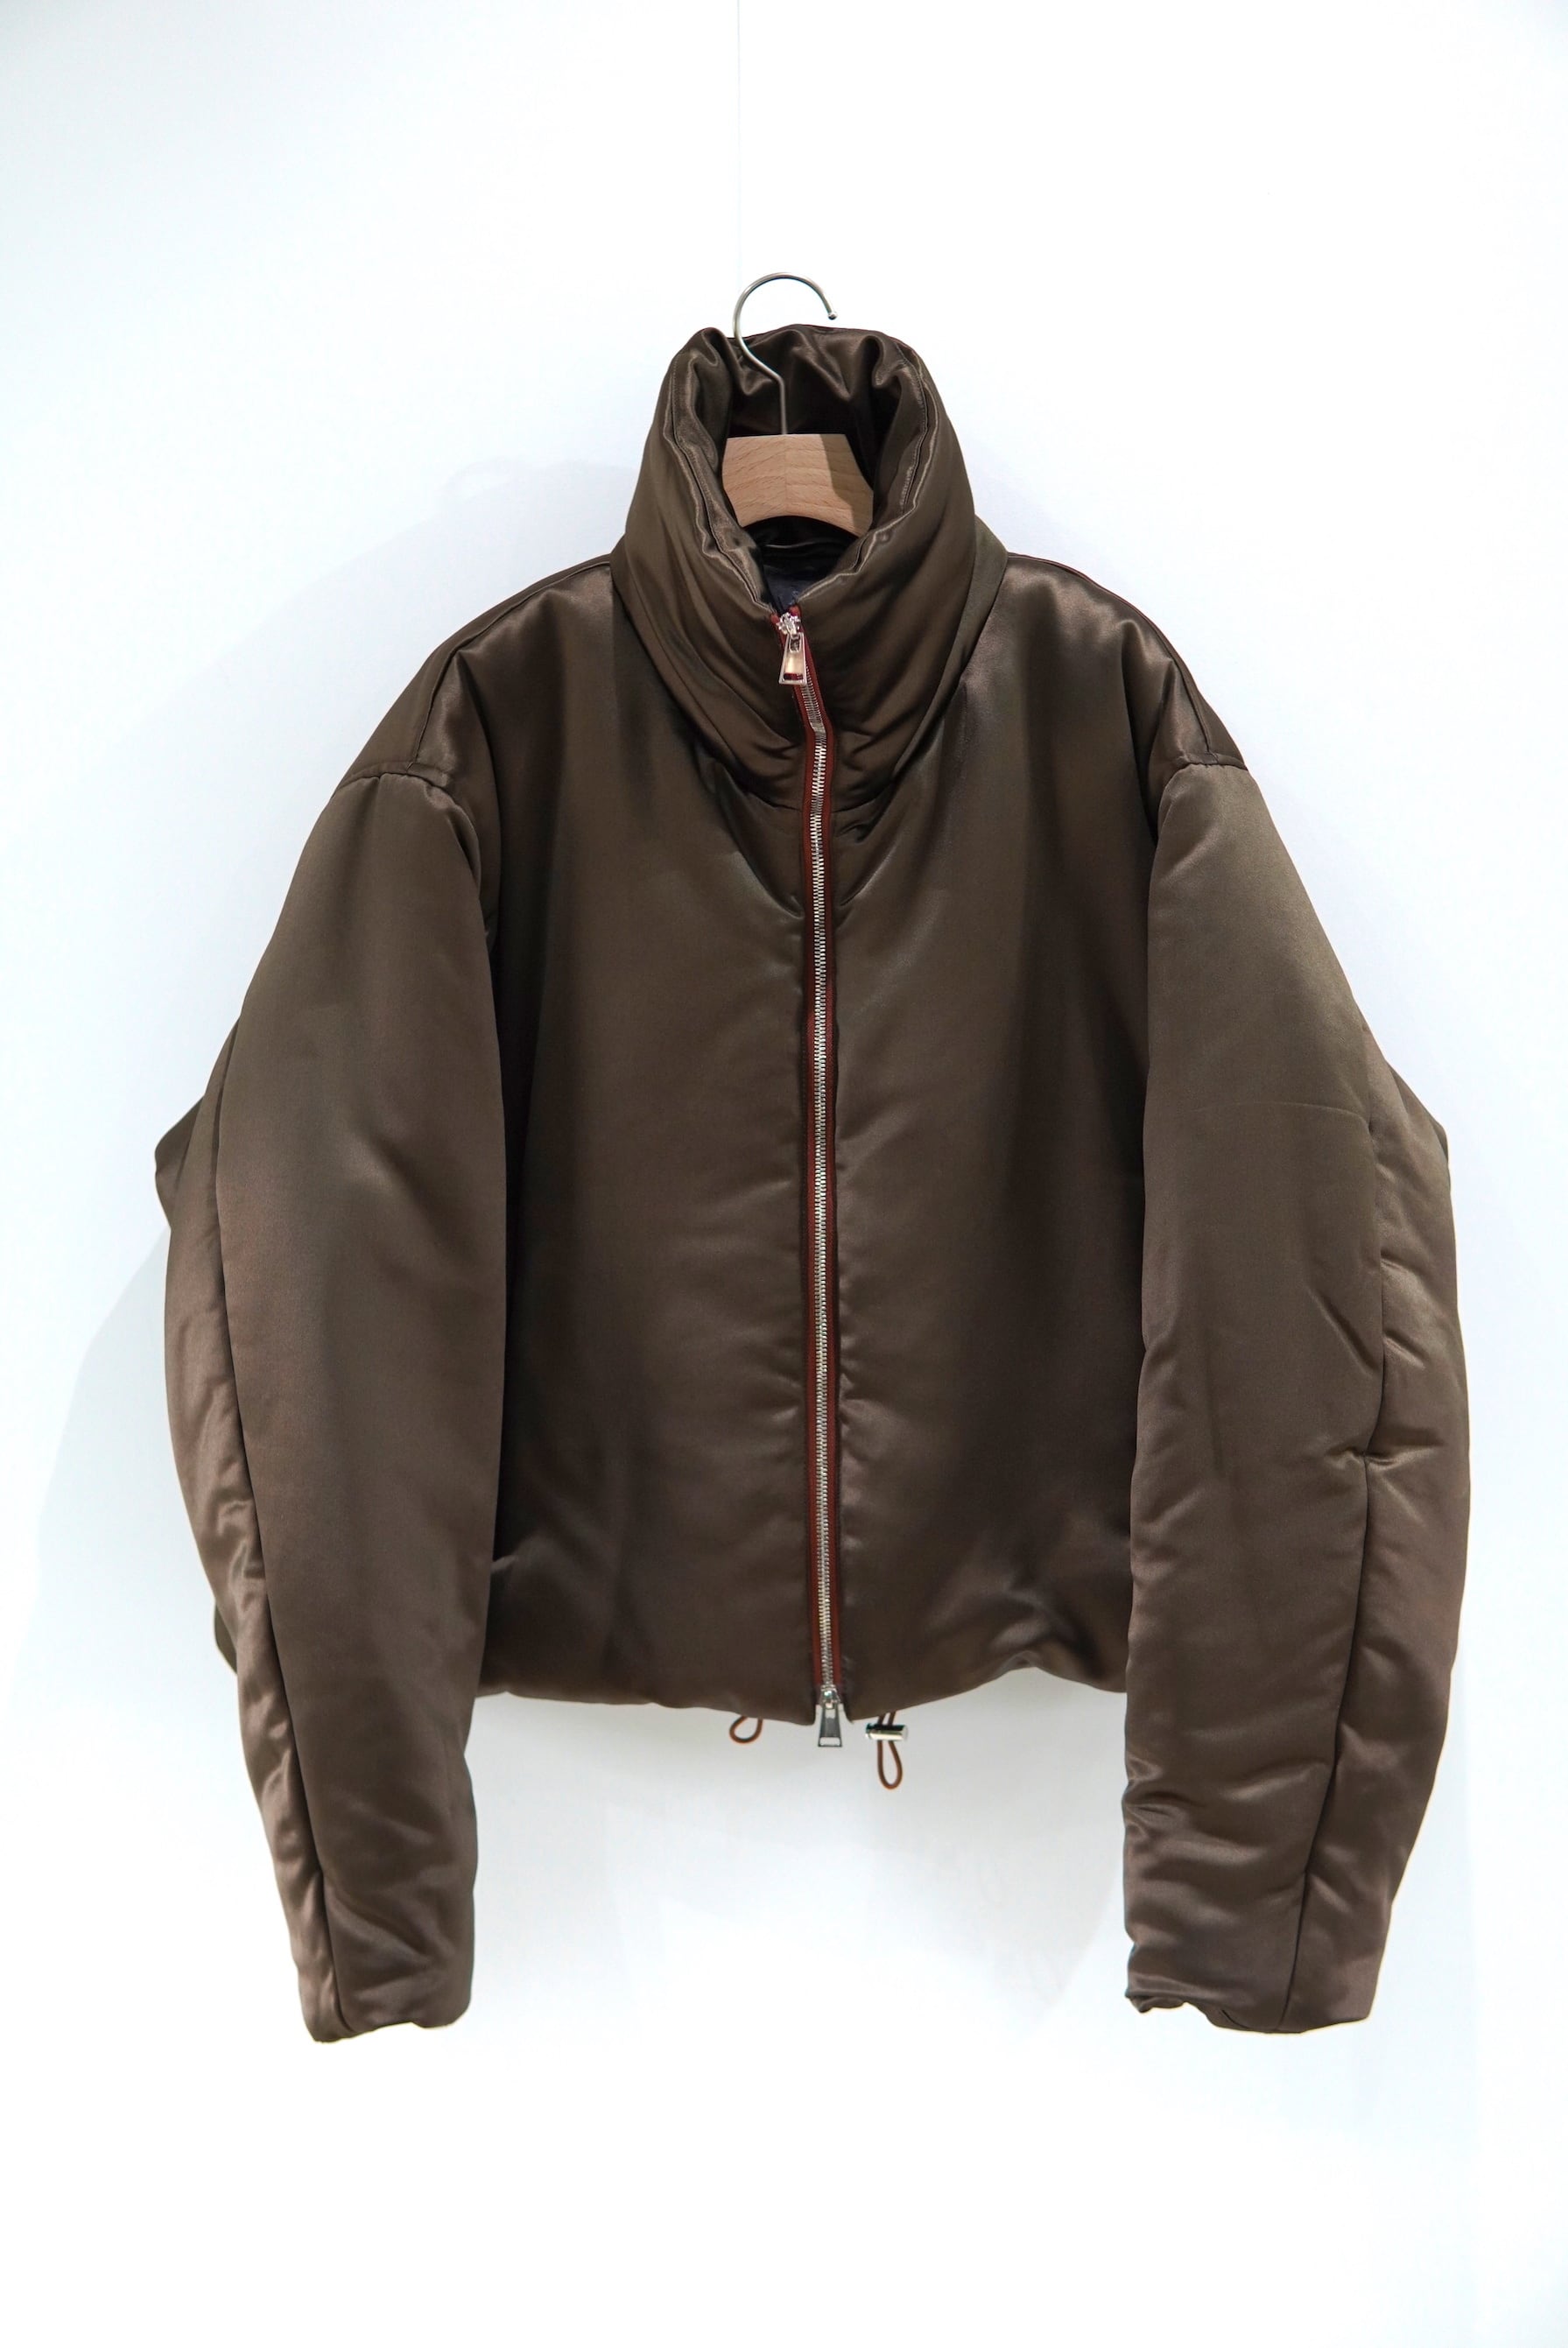 OUAT / PUFFER JACKET / BROWN -  size 2